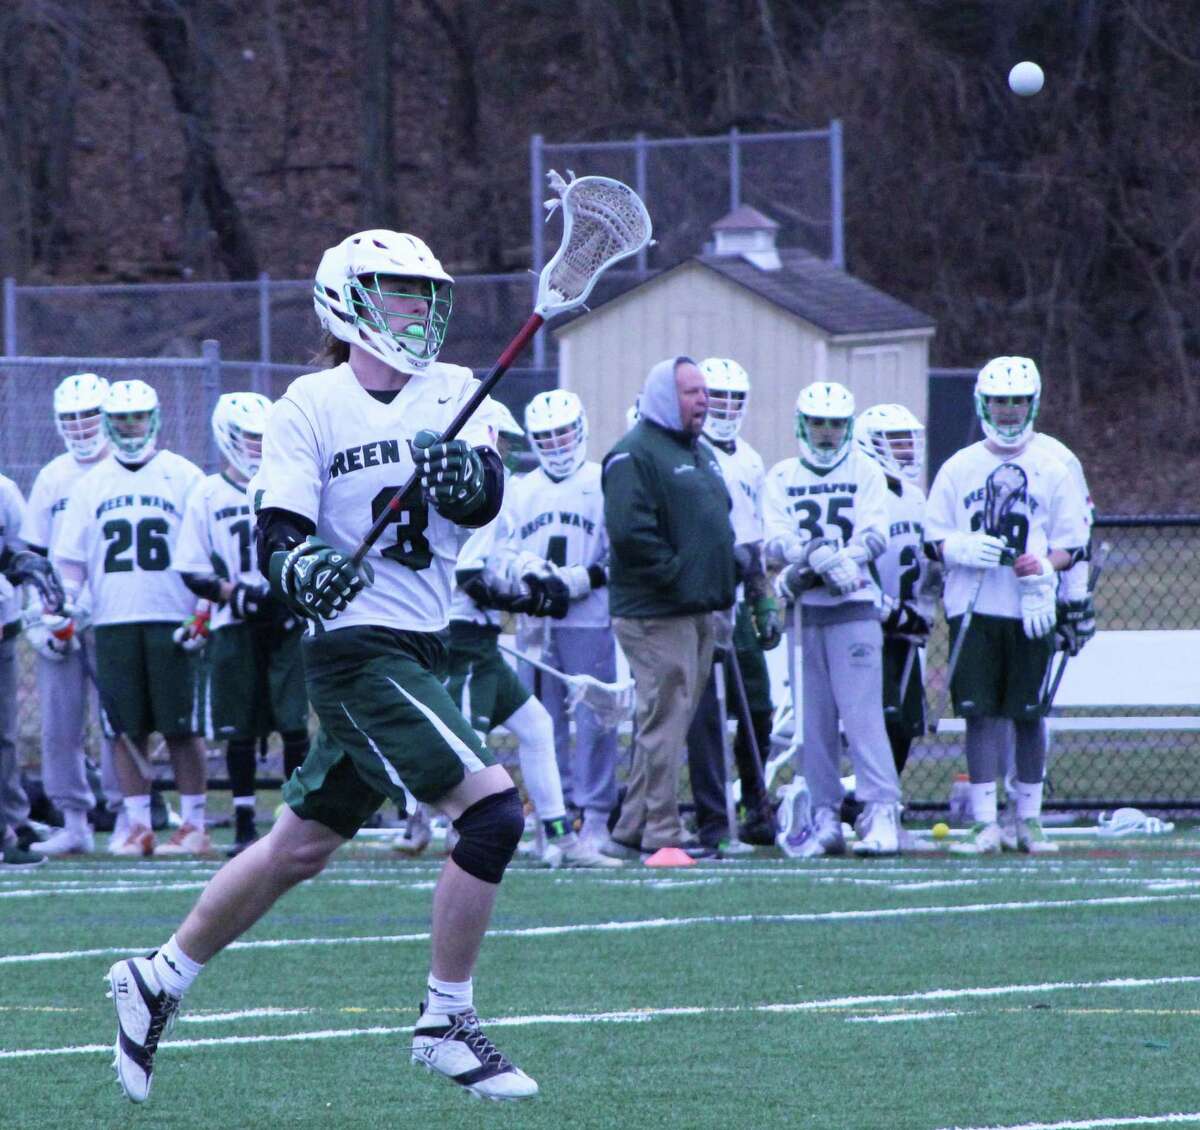 The New Milford High School boys’ lacrosse team recently played Pomperaug High School. The Green Wave won their first game of the season with a score of 8-6. Junior Nate Capriglione throws the ball to a teammate on the field during the April 1 game.